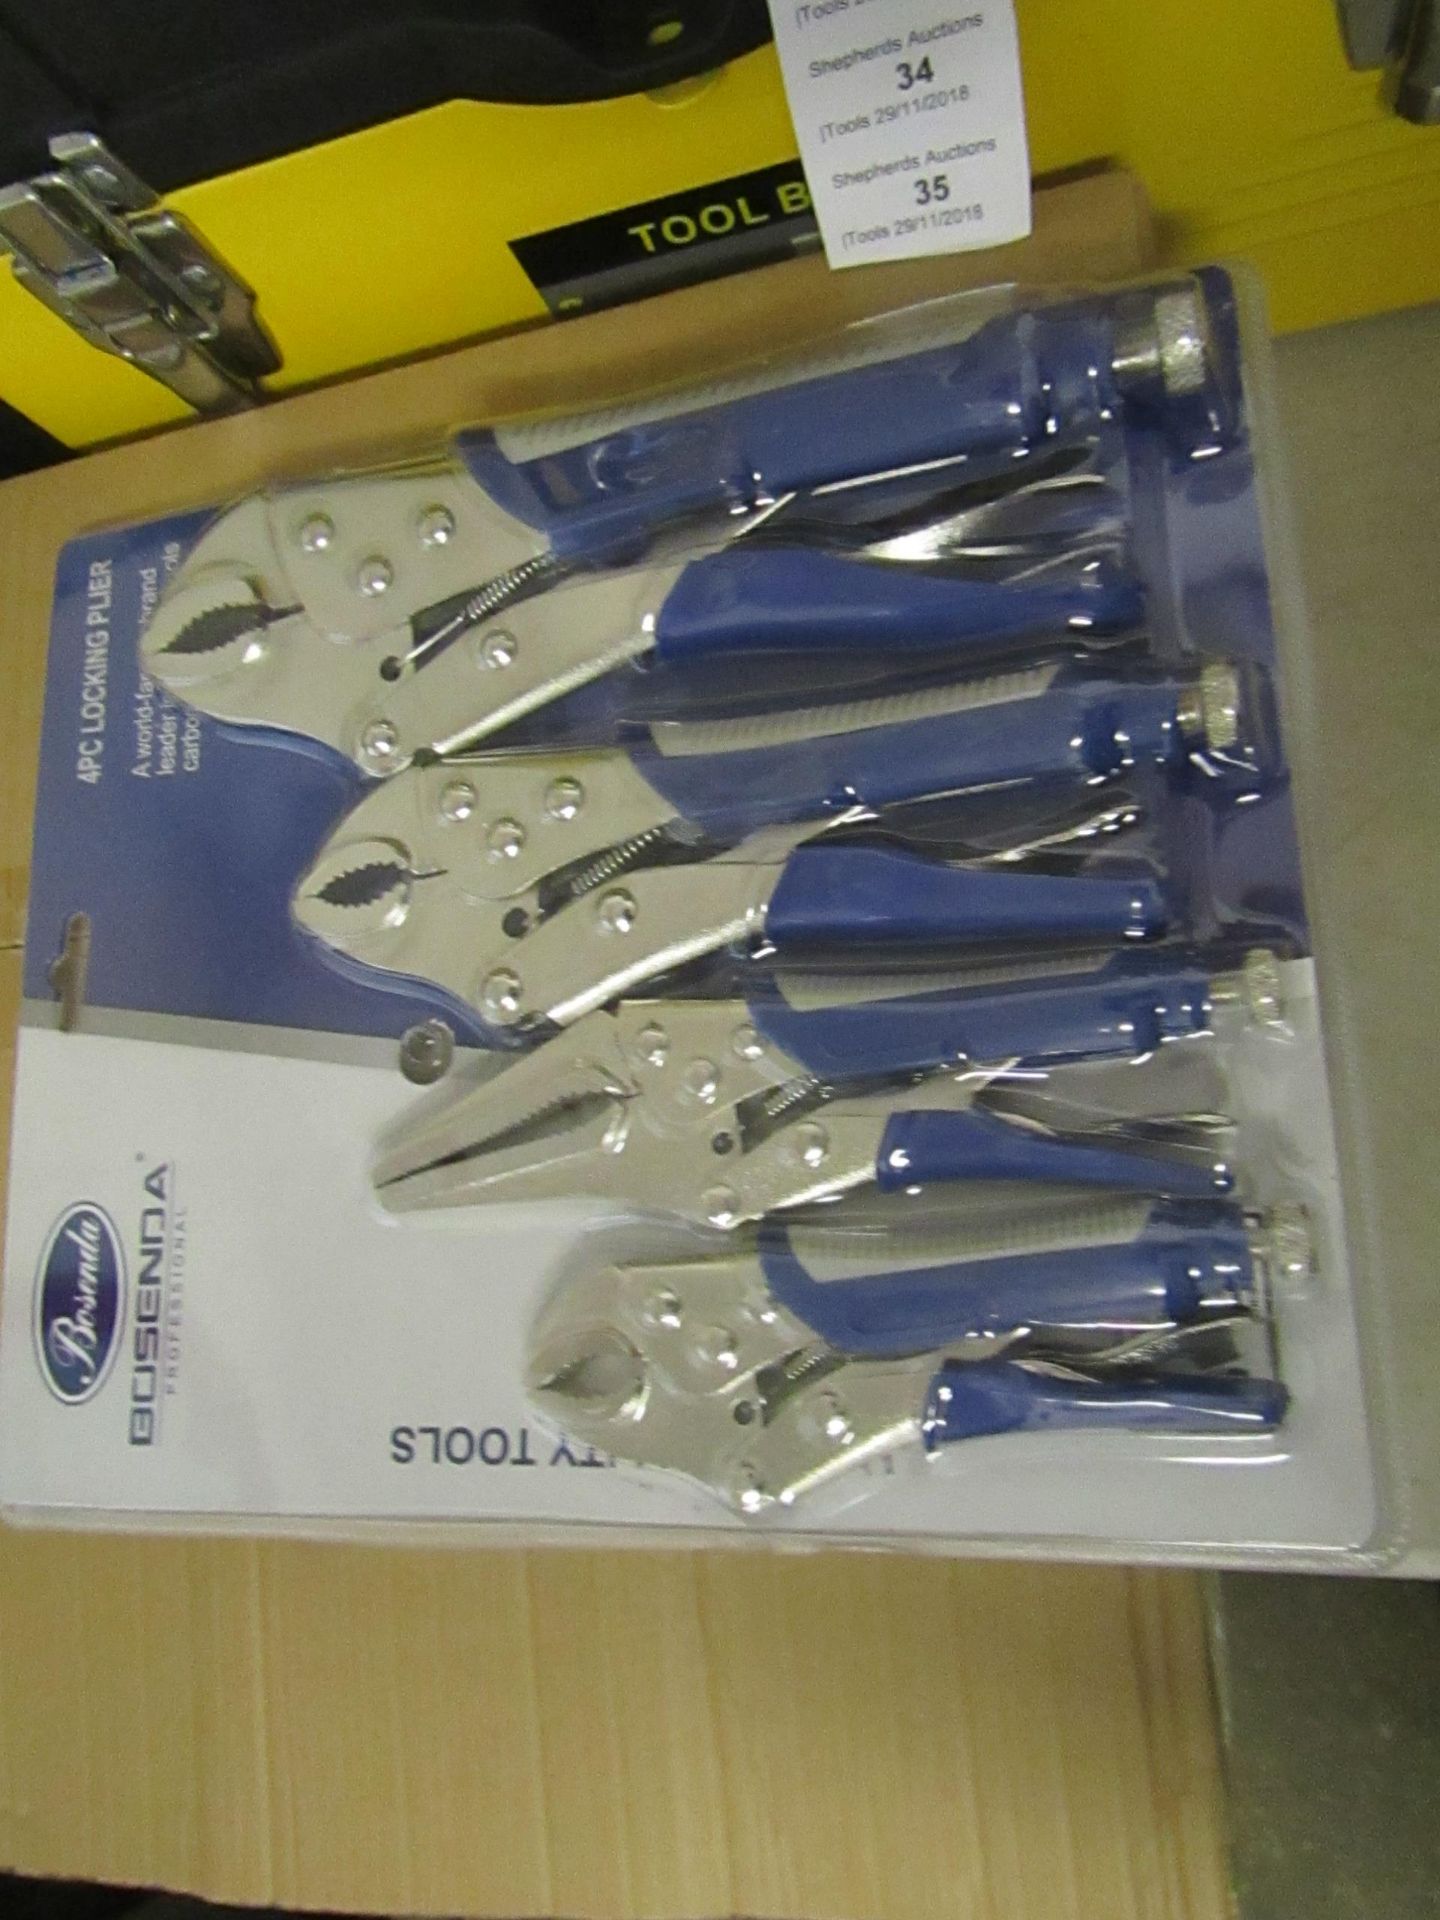 Bosenda Professional set of 4 Locking Pliers, new and blister packed